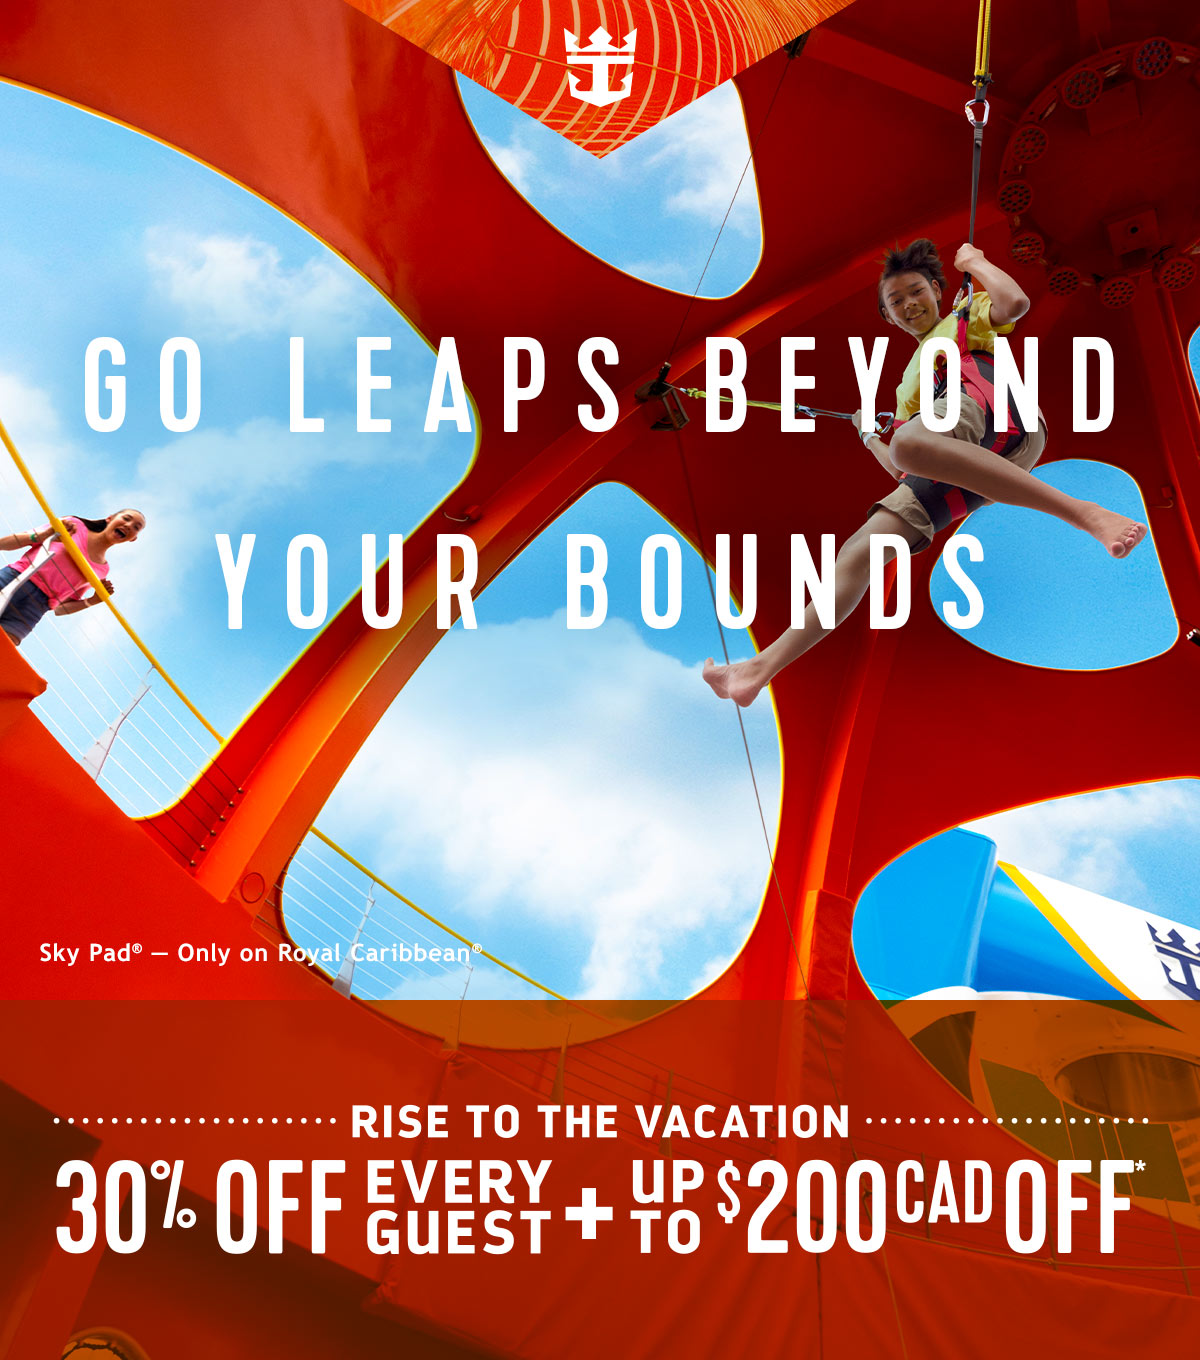 GO LEAPS BEYOND YOUR BOUNDS